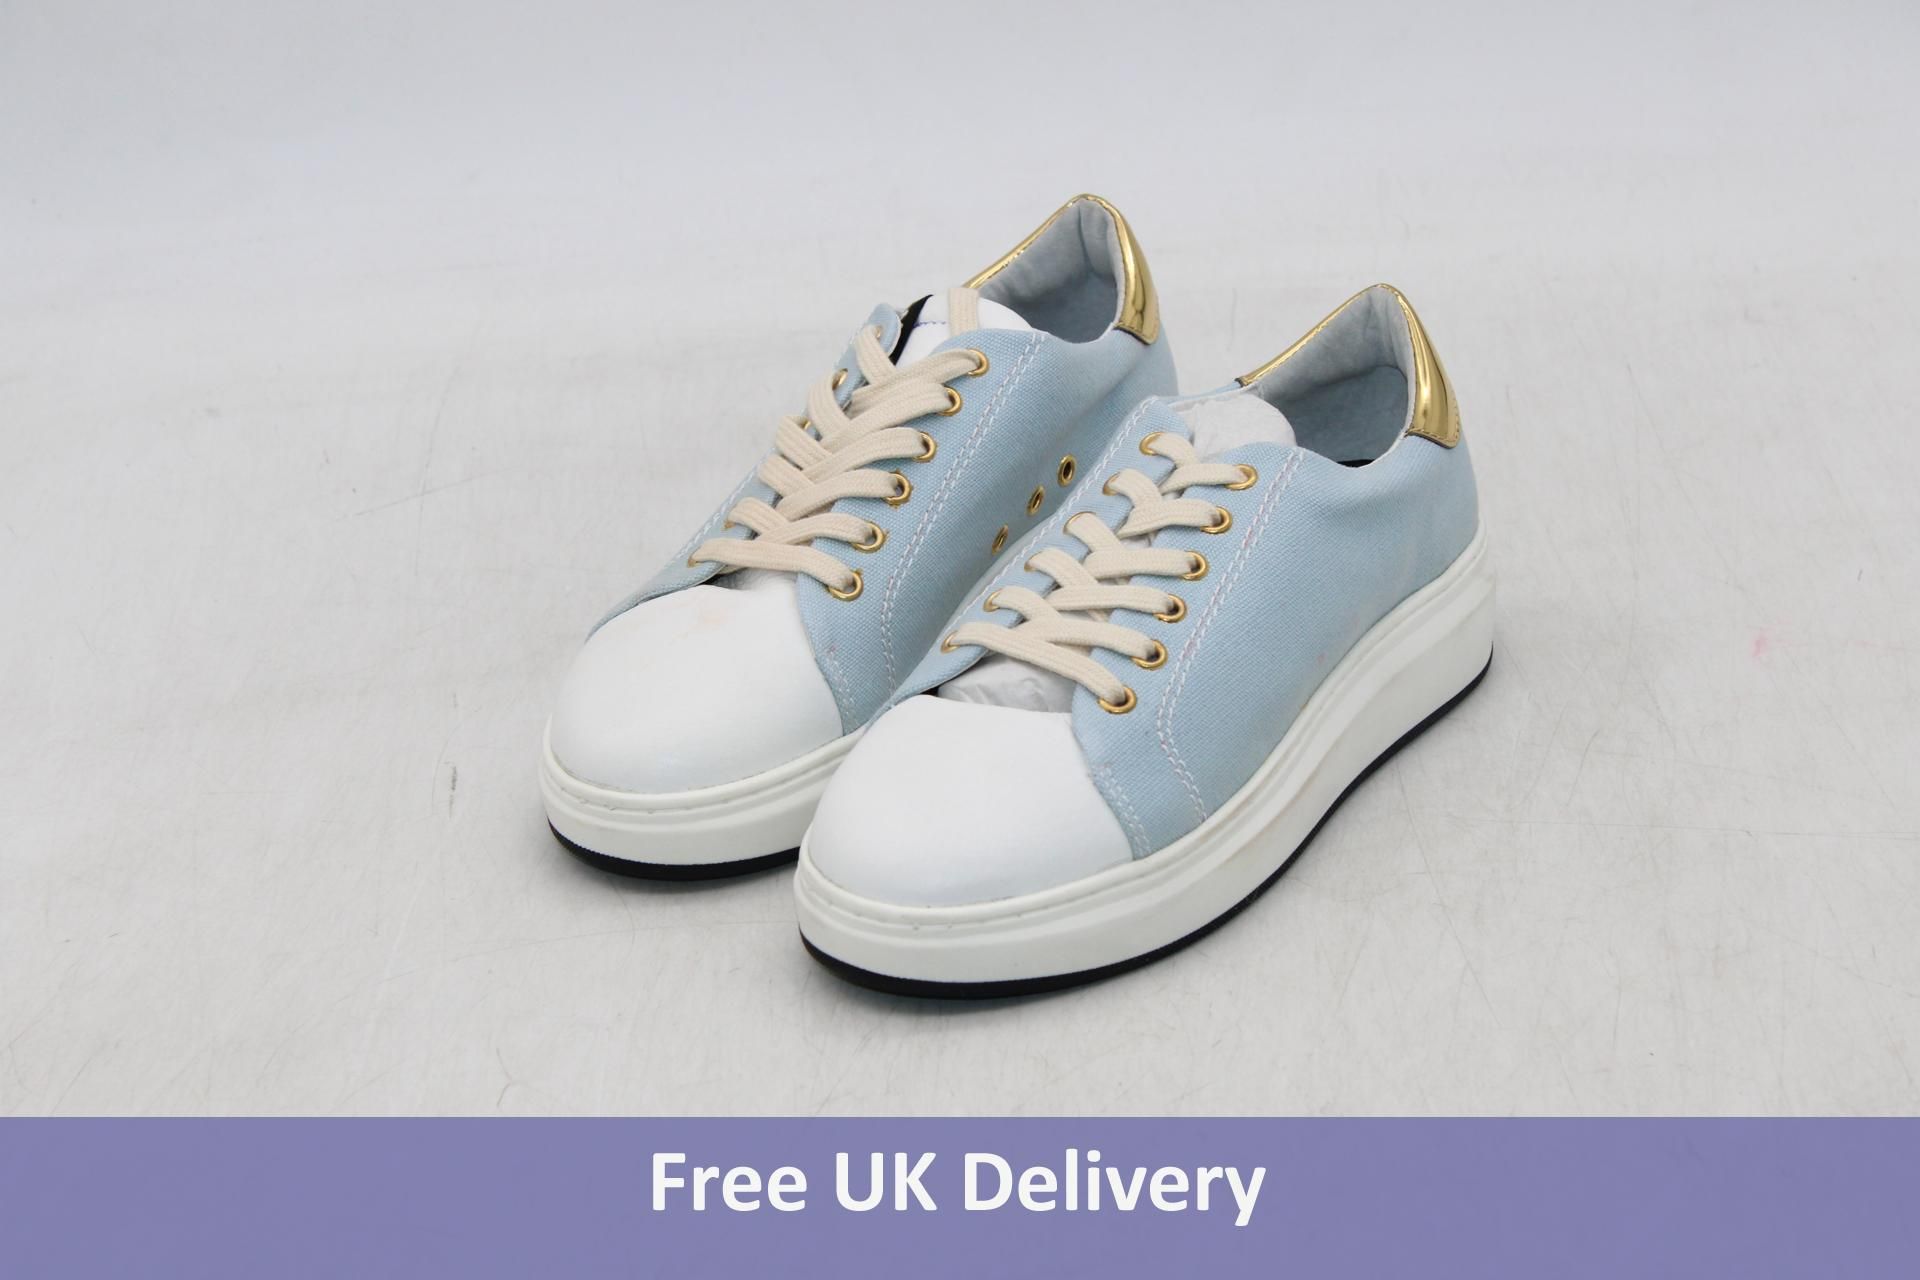 Mos Mosh, Copenhaged Canvas Sneakers, Blue, Size 37, No Box. Used